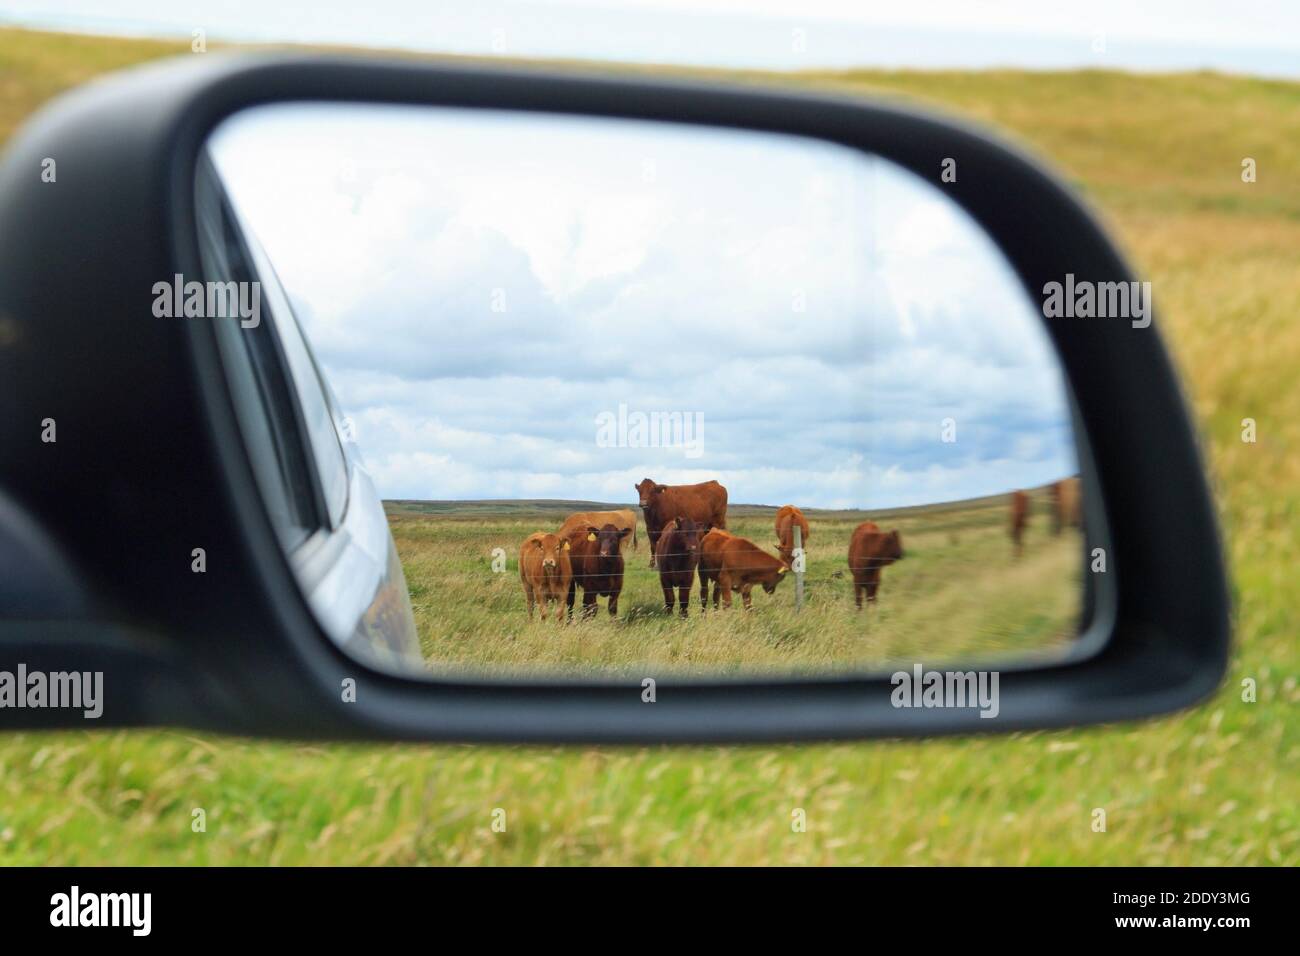 Reflection of a herd of brown cows in a car's rear view mirror. Isle of Islay, Scotland Stock Photo